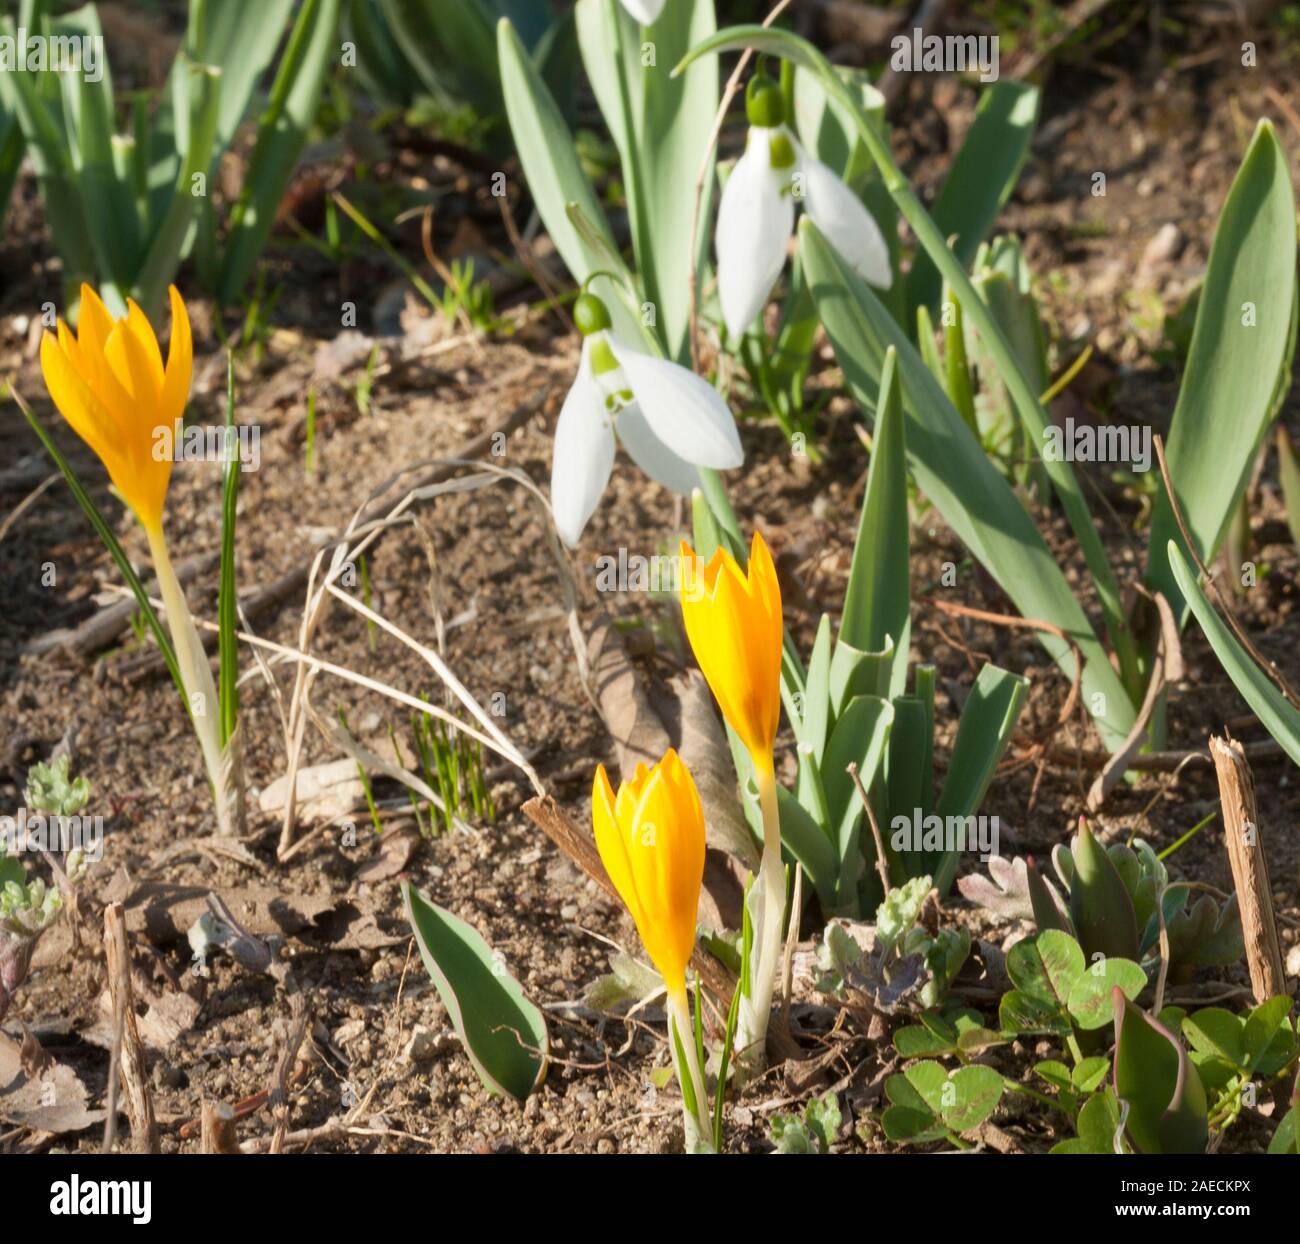 Yellow crocuses and white snowdrops first spring flowers on ground, St. St. Constantine and Helena, Bulgaria. Stock Photo